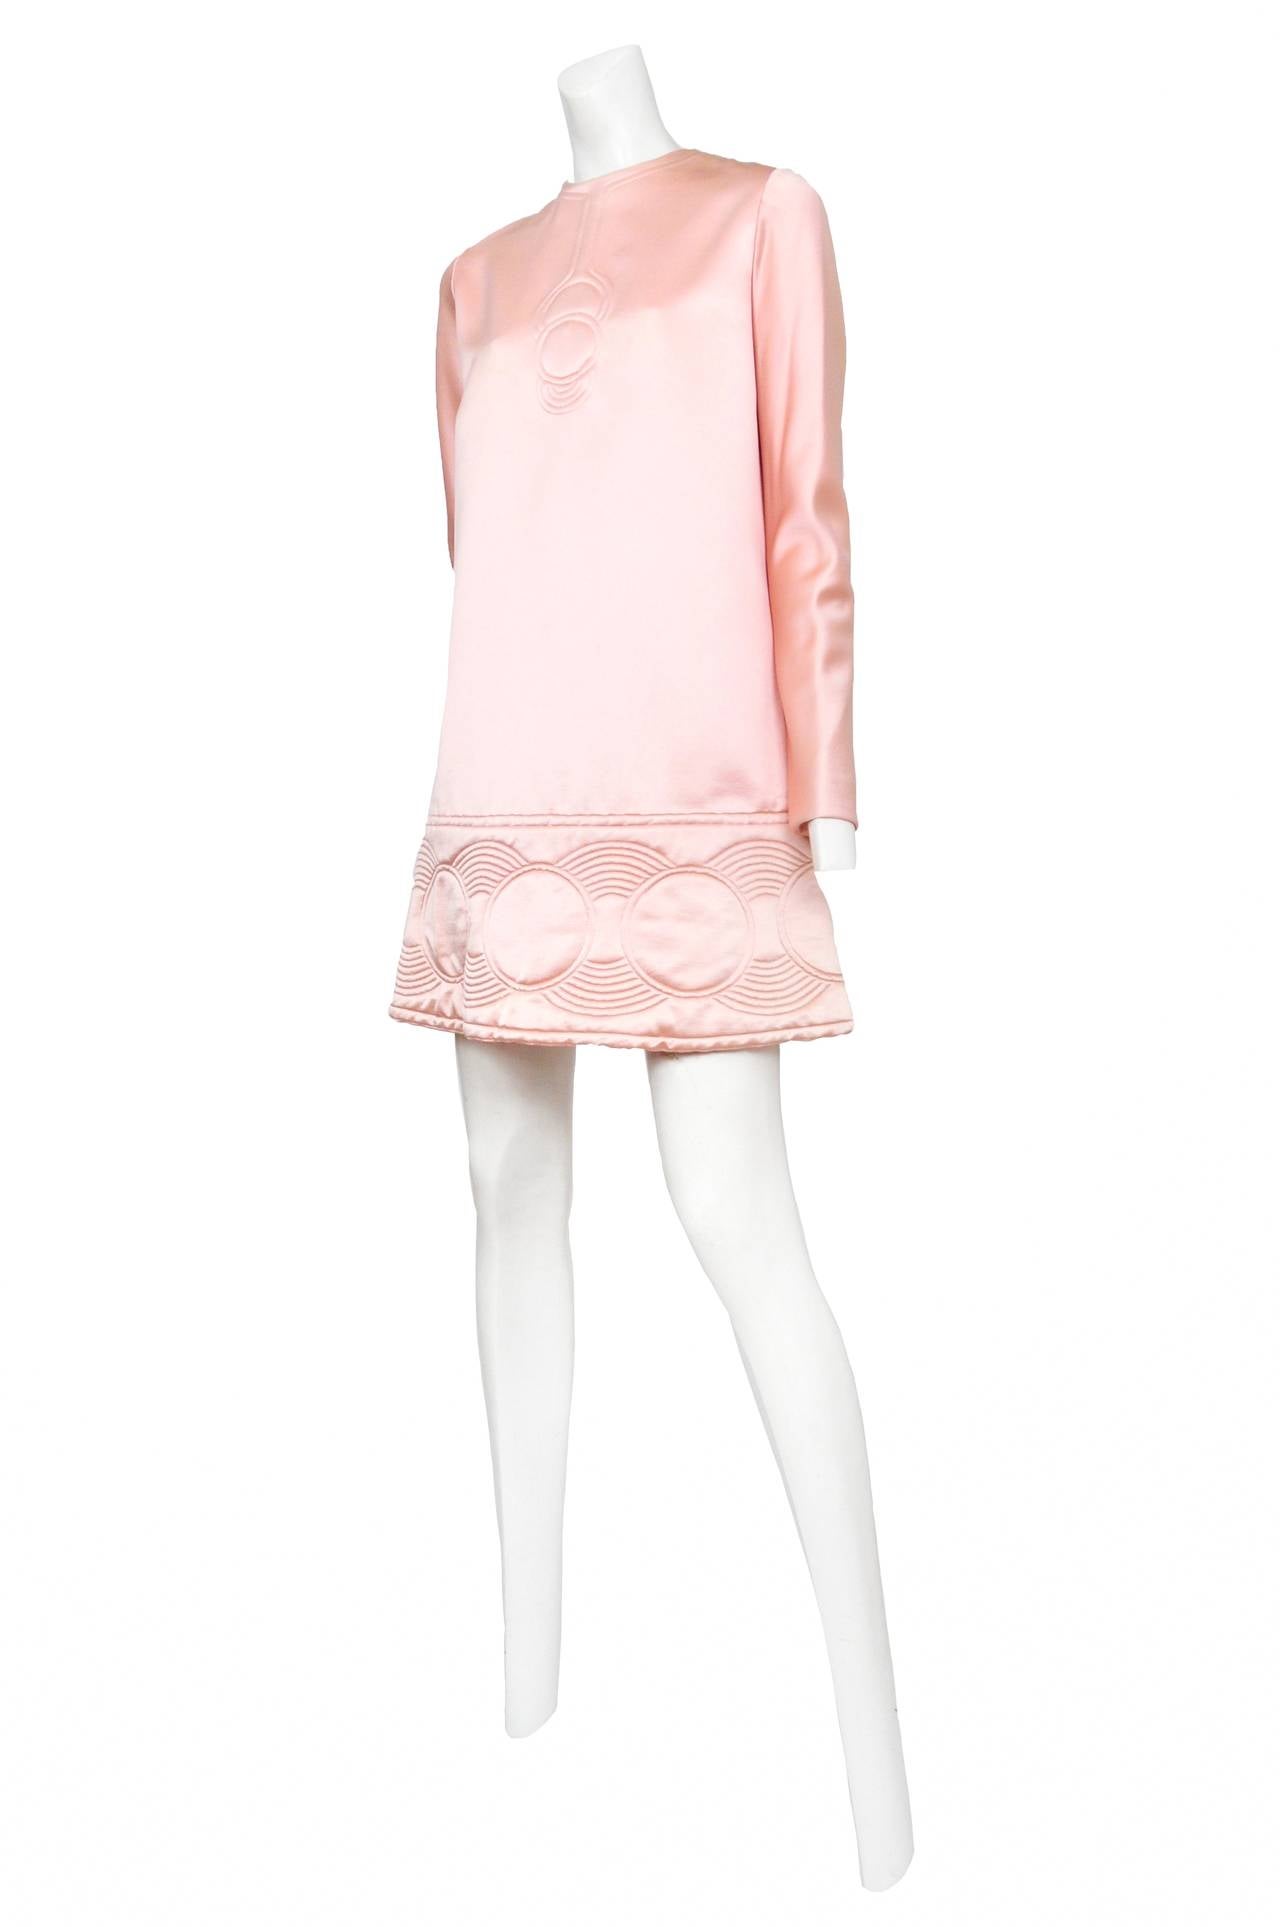 Vintage Pierre Cardin soft pink duchess satin long sleeve shift dress featuring iconic Cardin circular stitch details at neckline and surrounding hem.